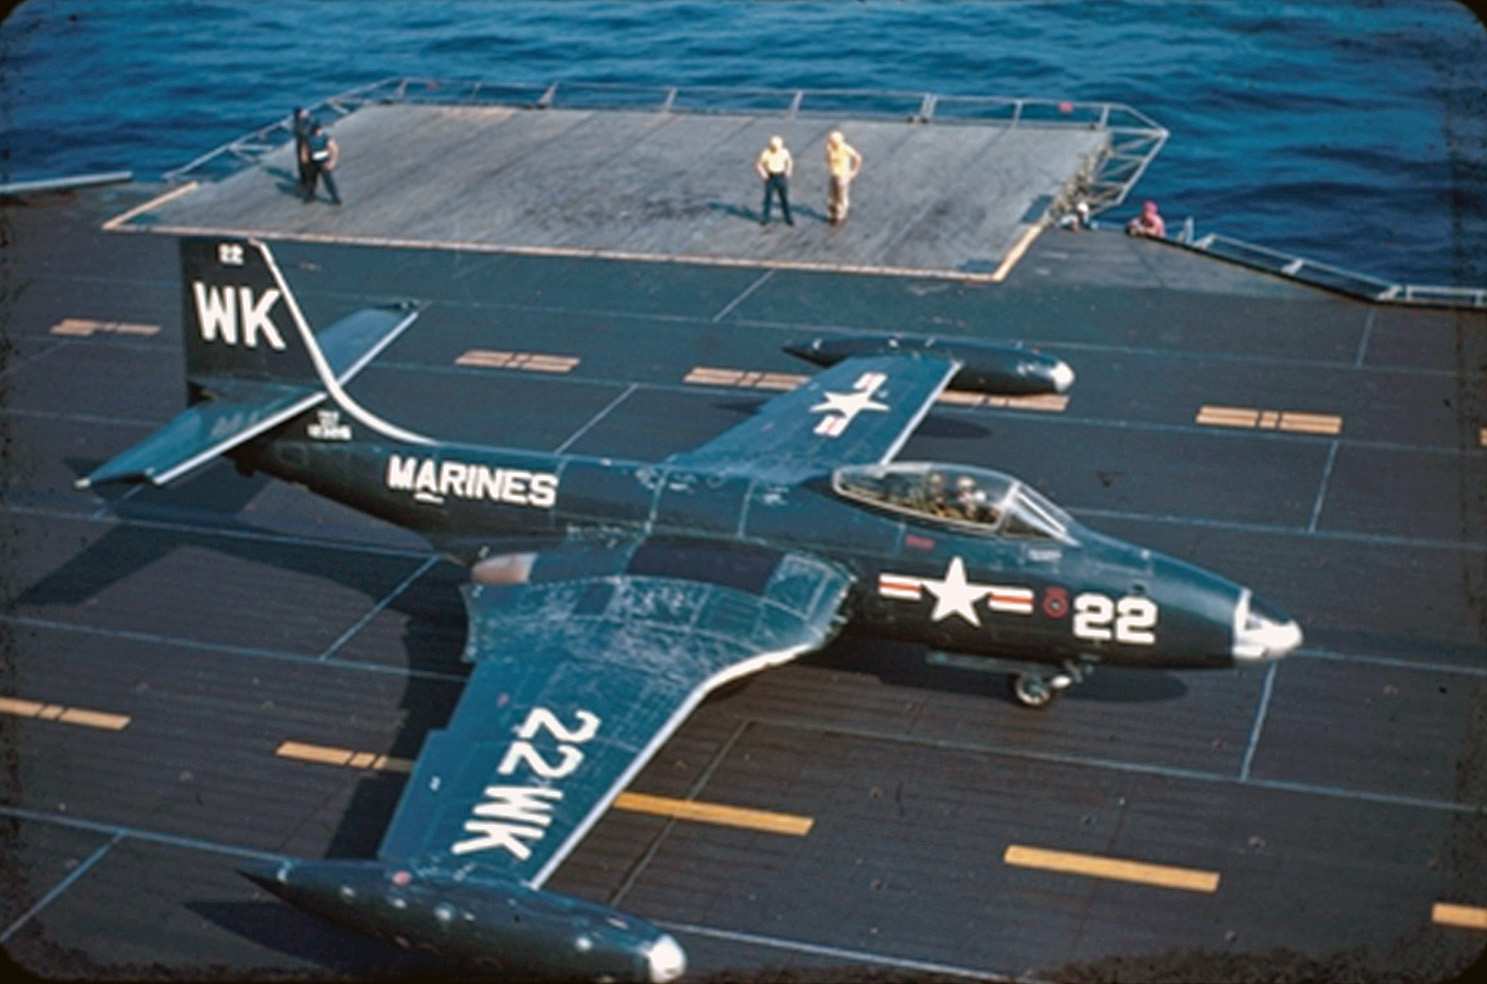 Another flight deck photo of aircraft by Ltjg Don Clark. A Marine F2H-2 Banshee of VMF-224(WK) prepares to launch from USS Franklin D. Roosevelt during a Med cruise. The squadron, the Bengals, still exist as VMFA-224 and fly's F/A-18D Hornets out of MCAS Beaufort in South Carolina. View full size.